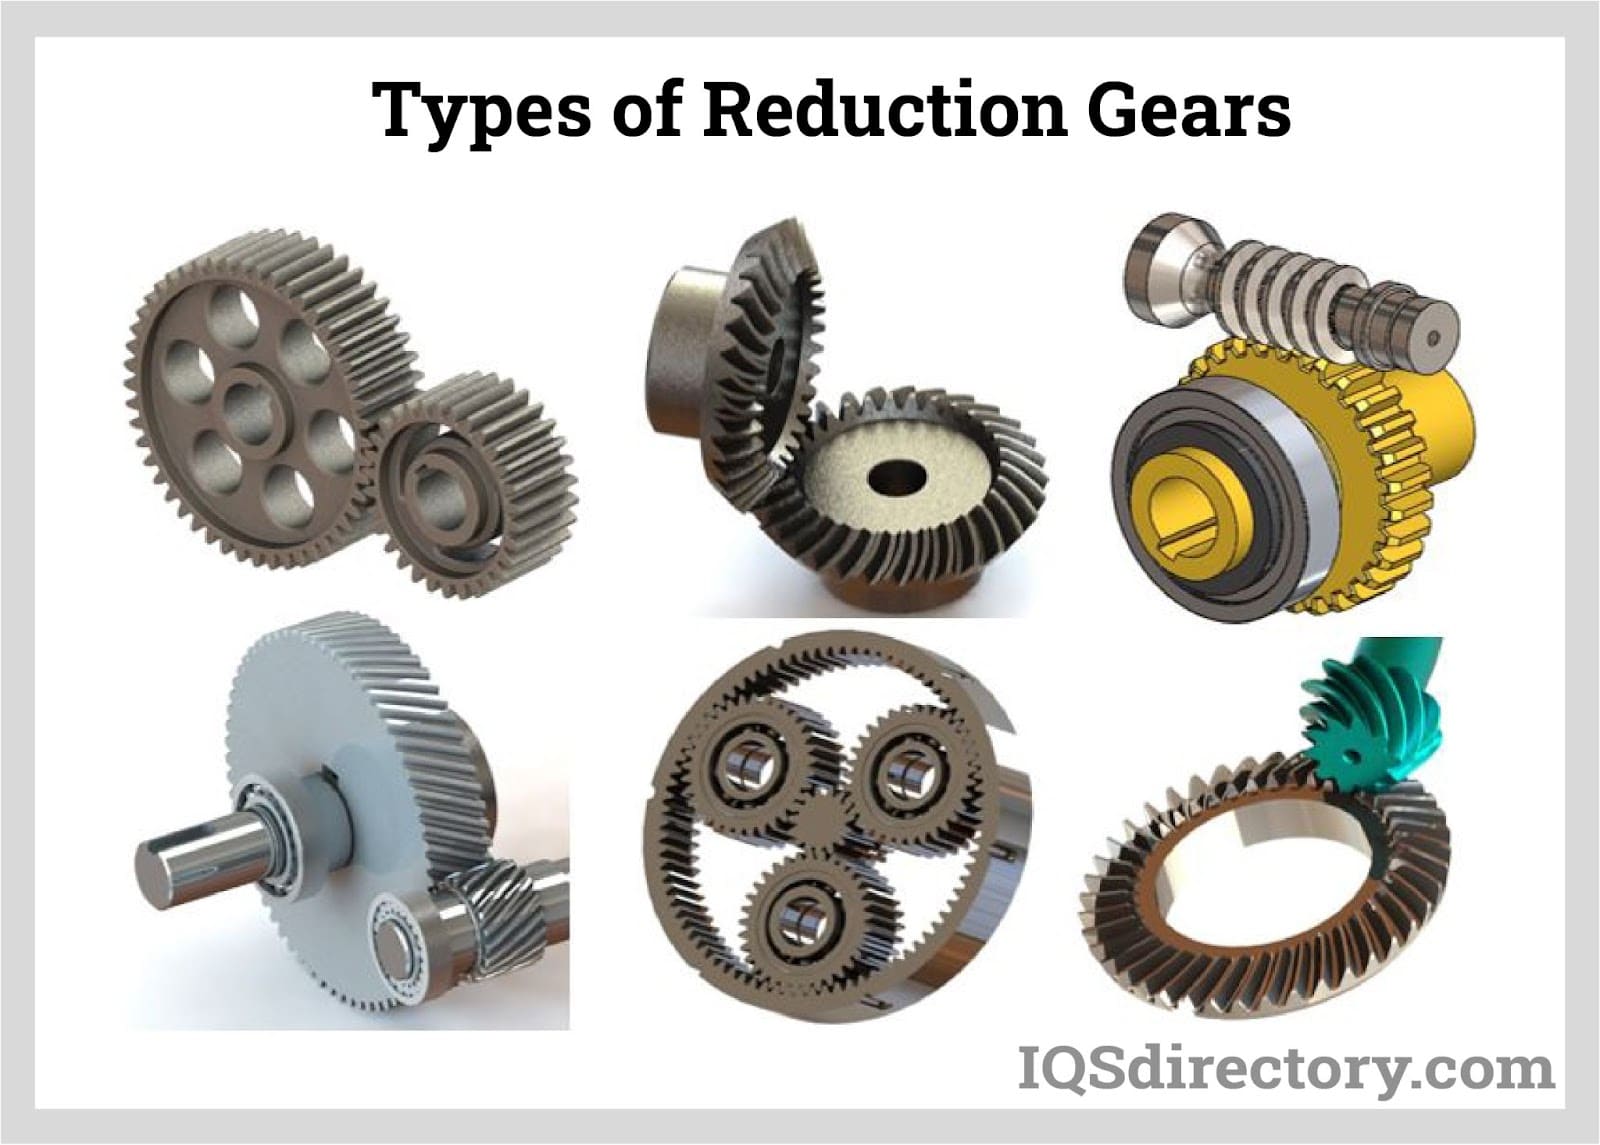 Gear manufacturing: Back to basics